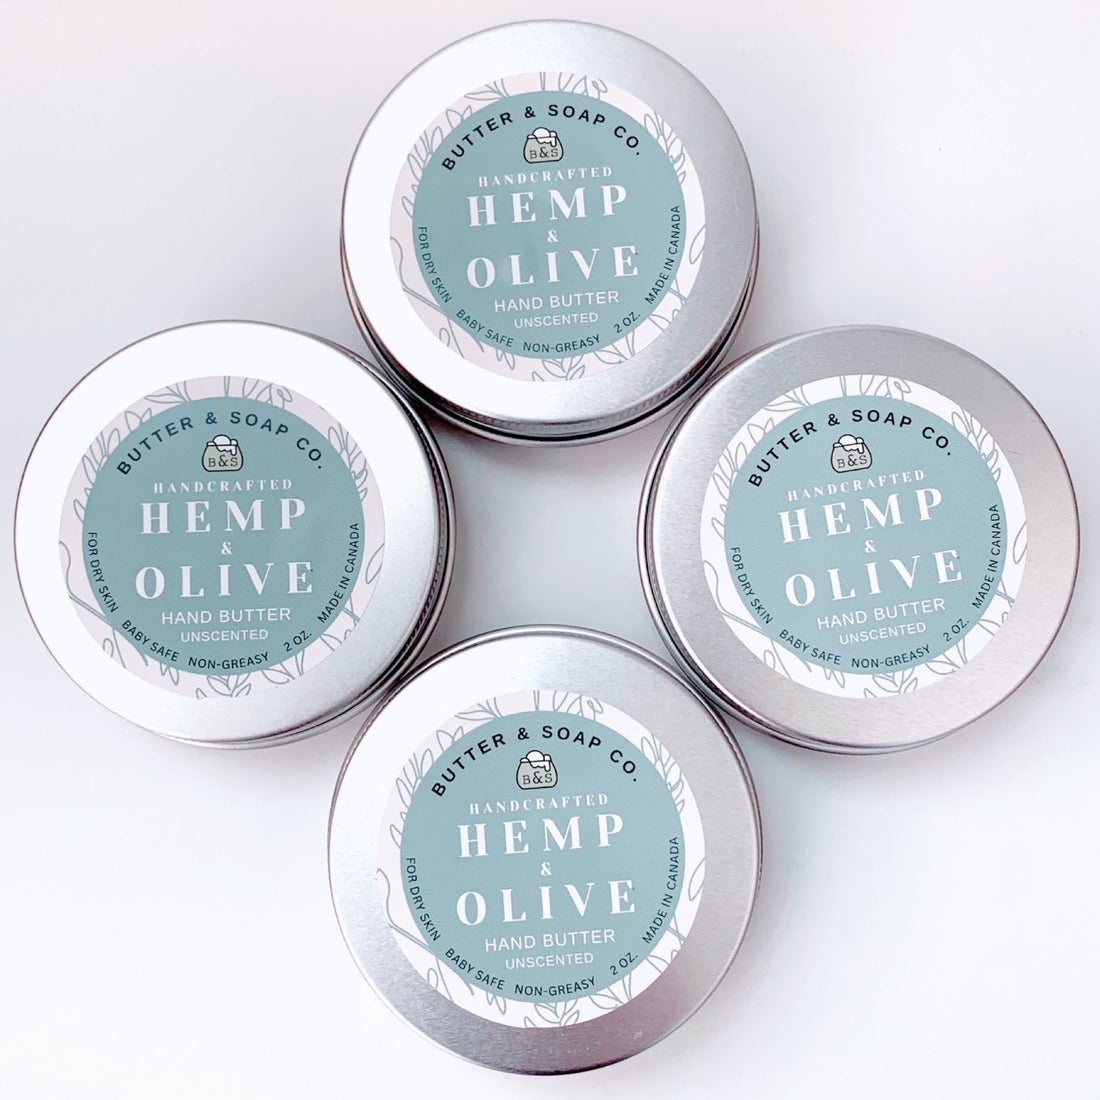 Butter & Soap Co. Hemp and Olive Nail and Hand Butter